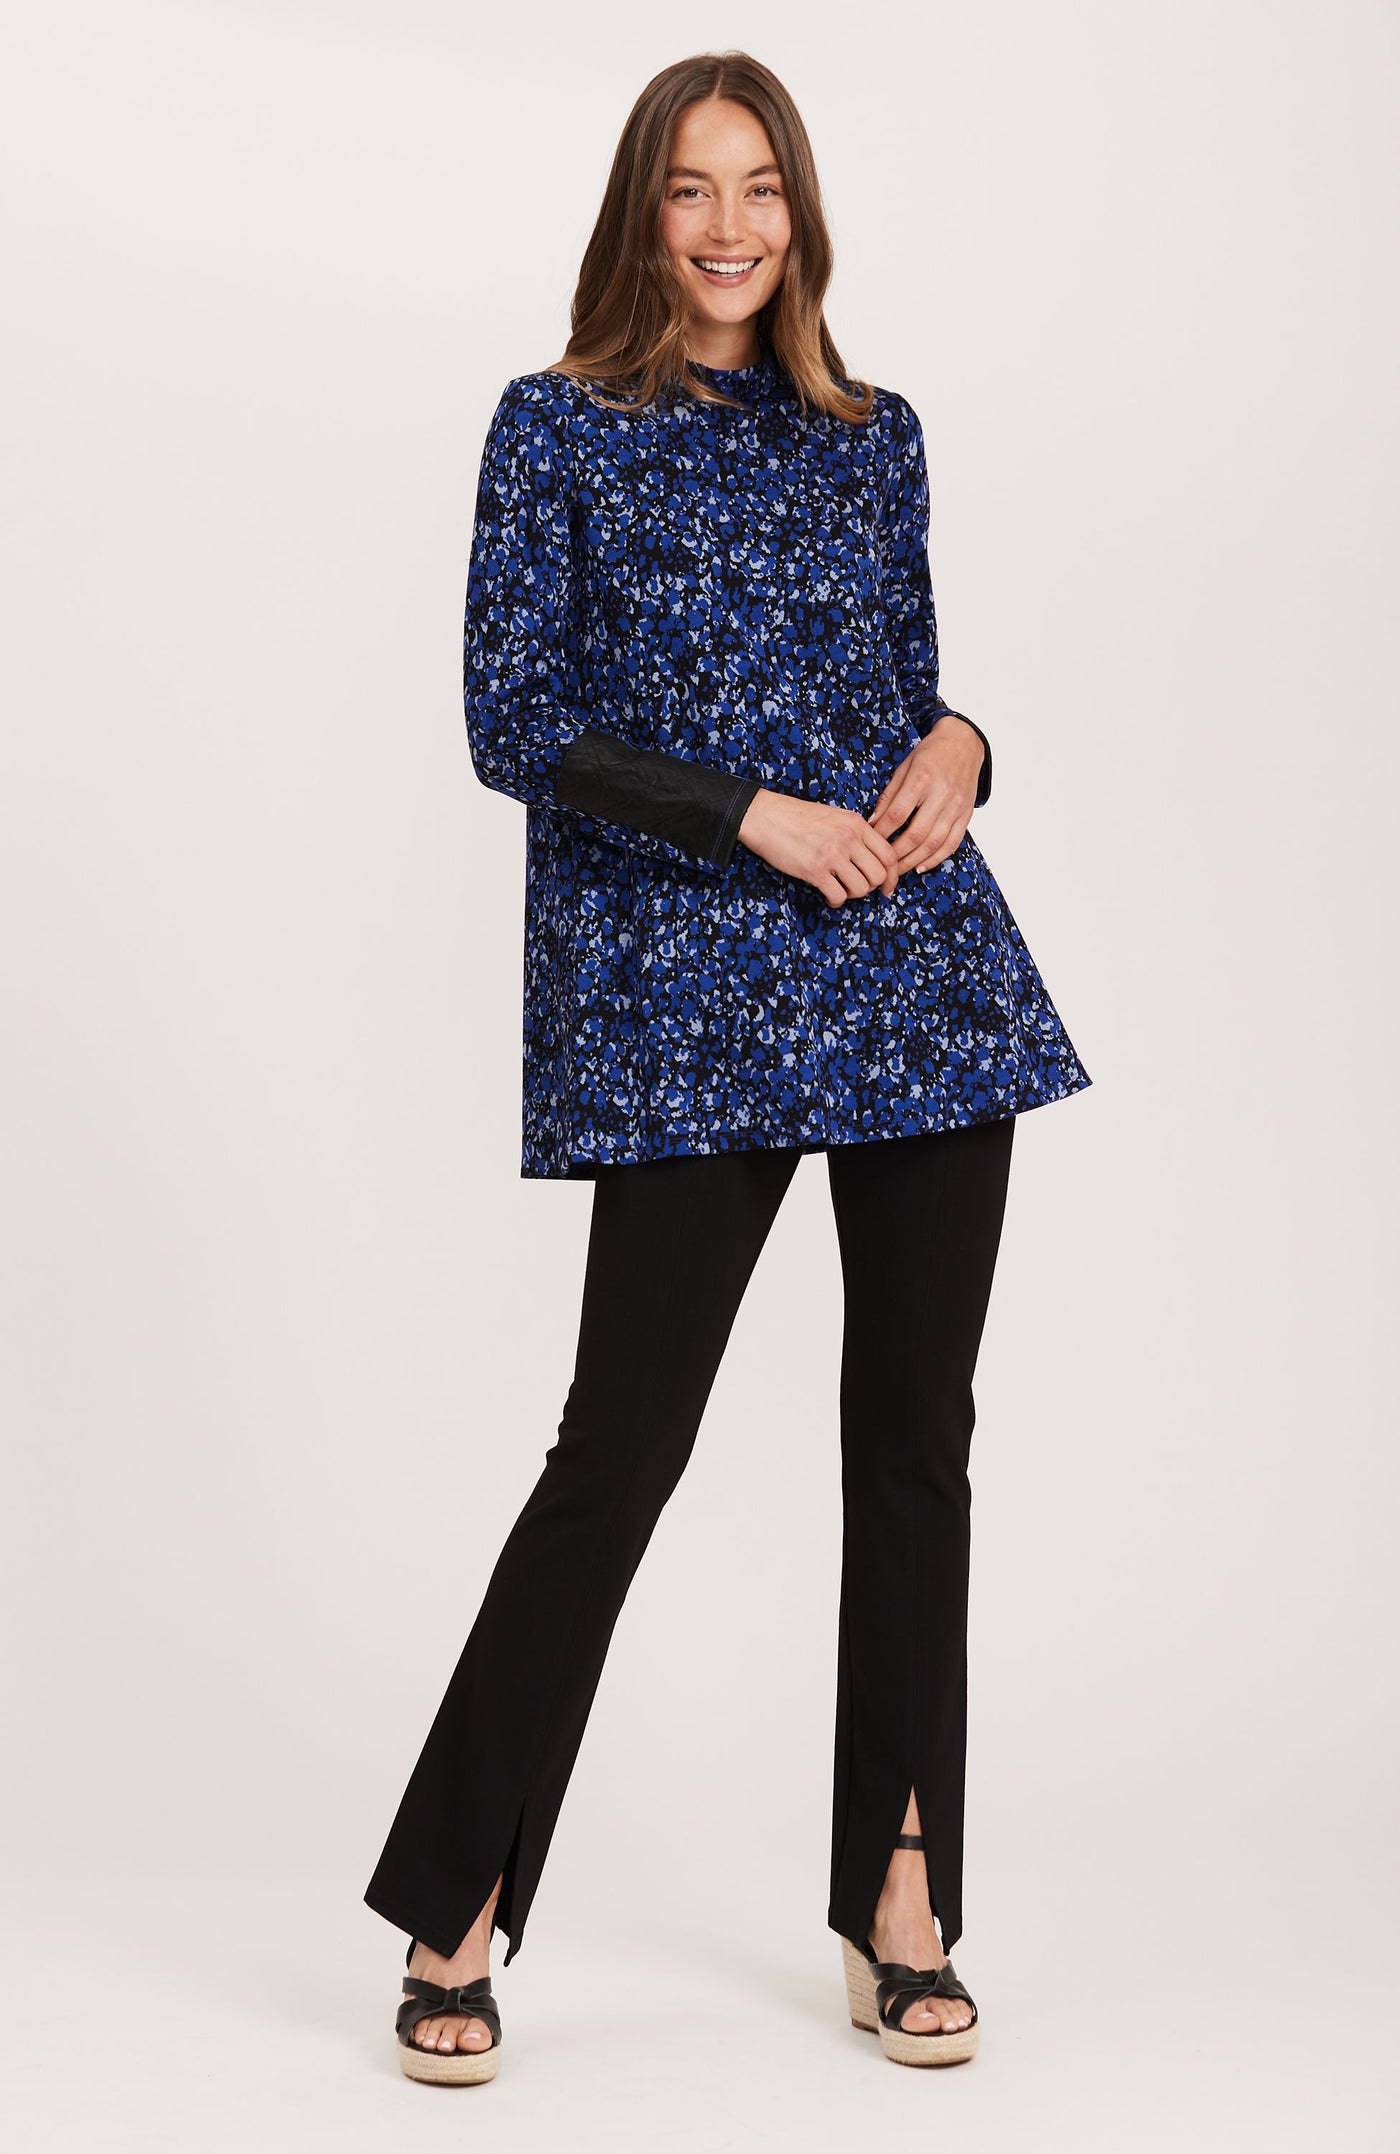 Chrissy Jacquard Tunic, Abstract Floral